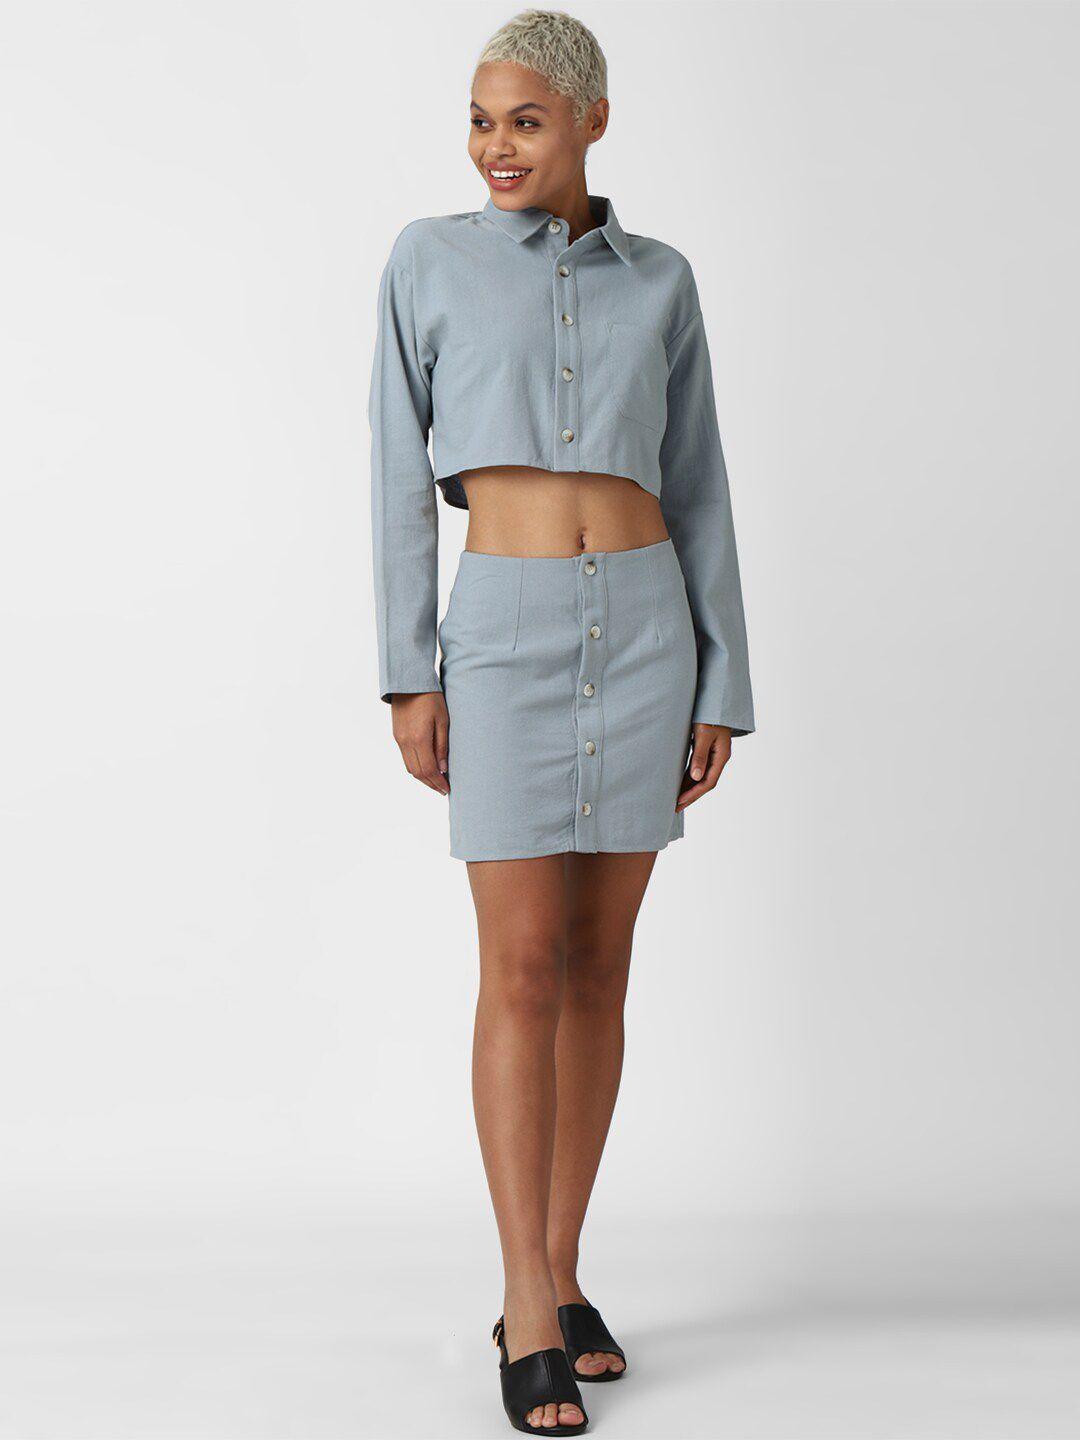 forever-21-women-grey-solid-shirt-with-skirt